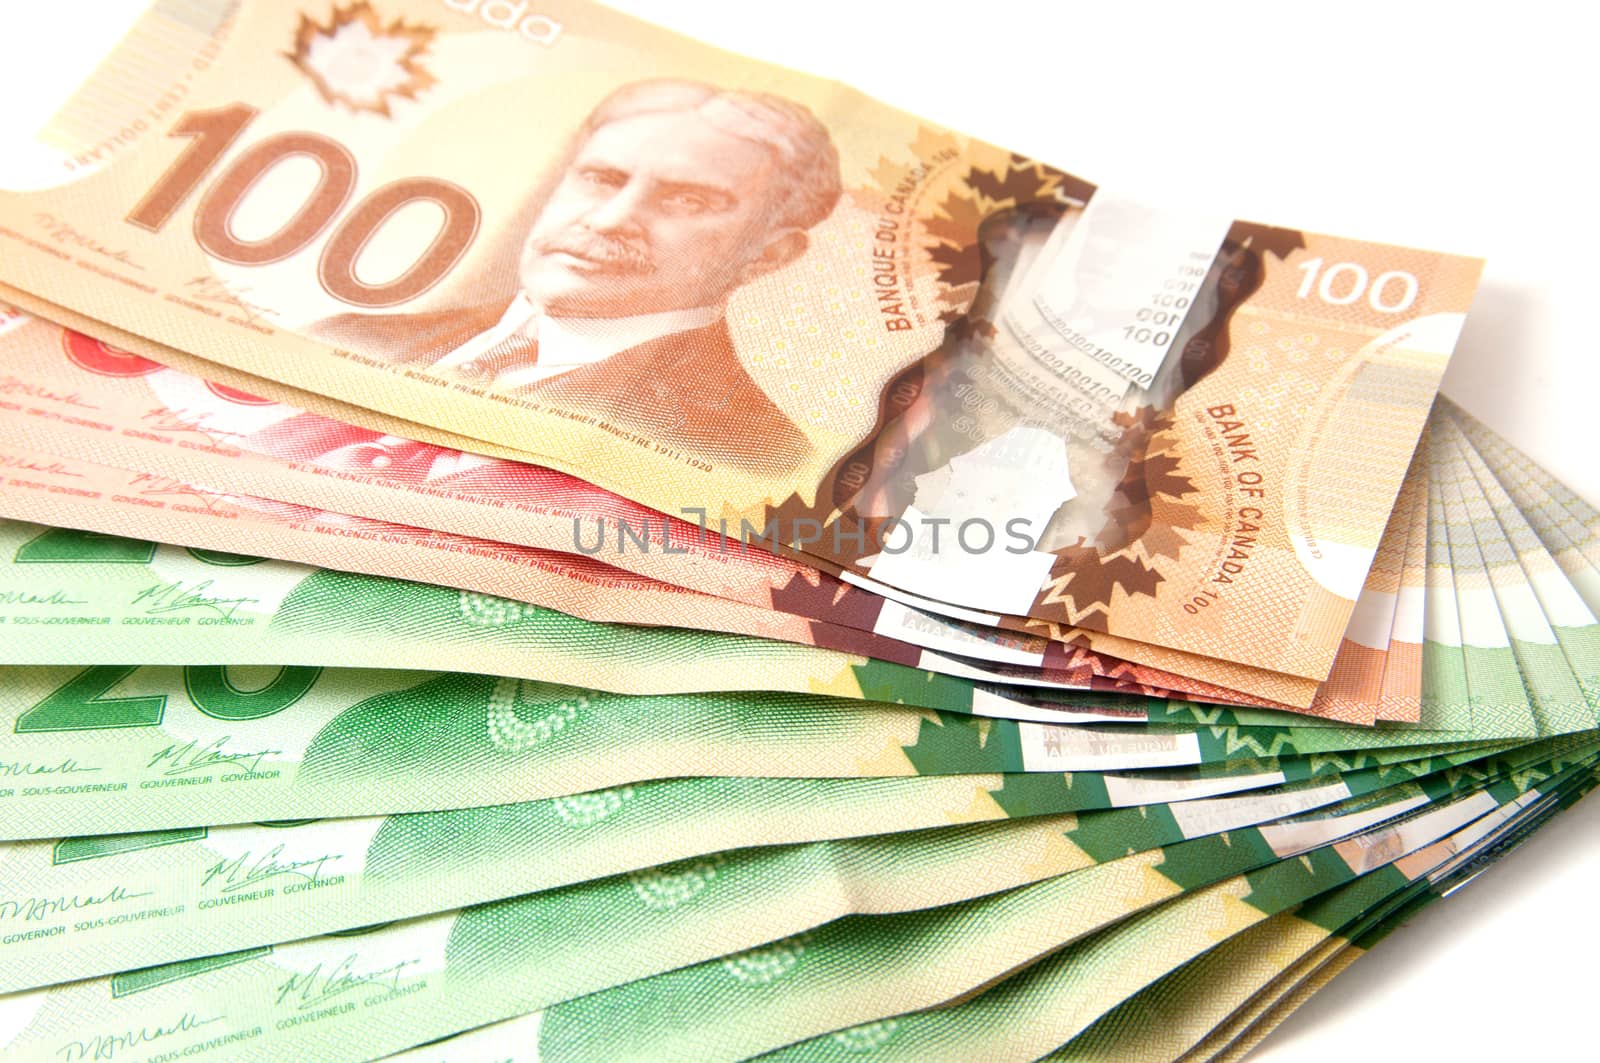 Canadian bank notes, 20, 50 and 100 dollars